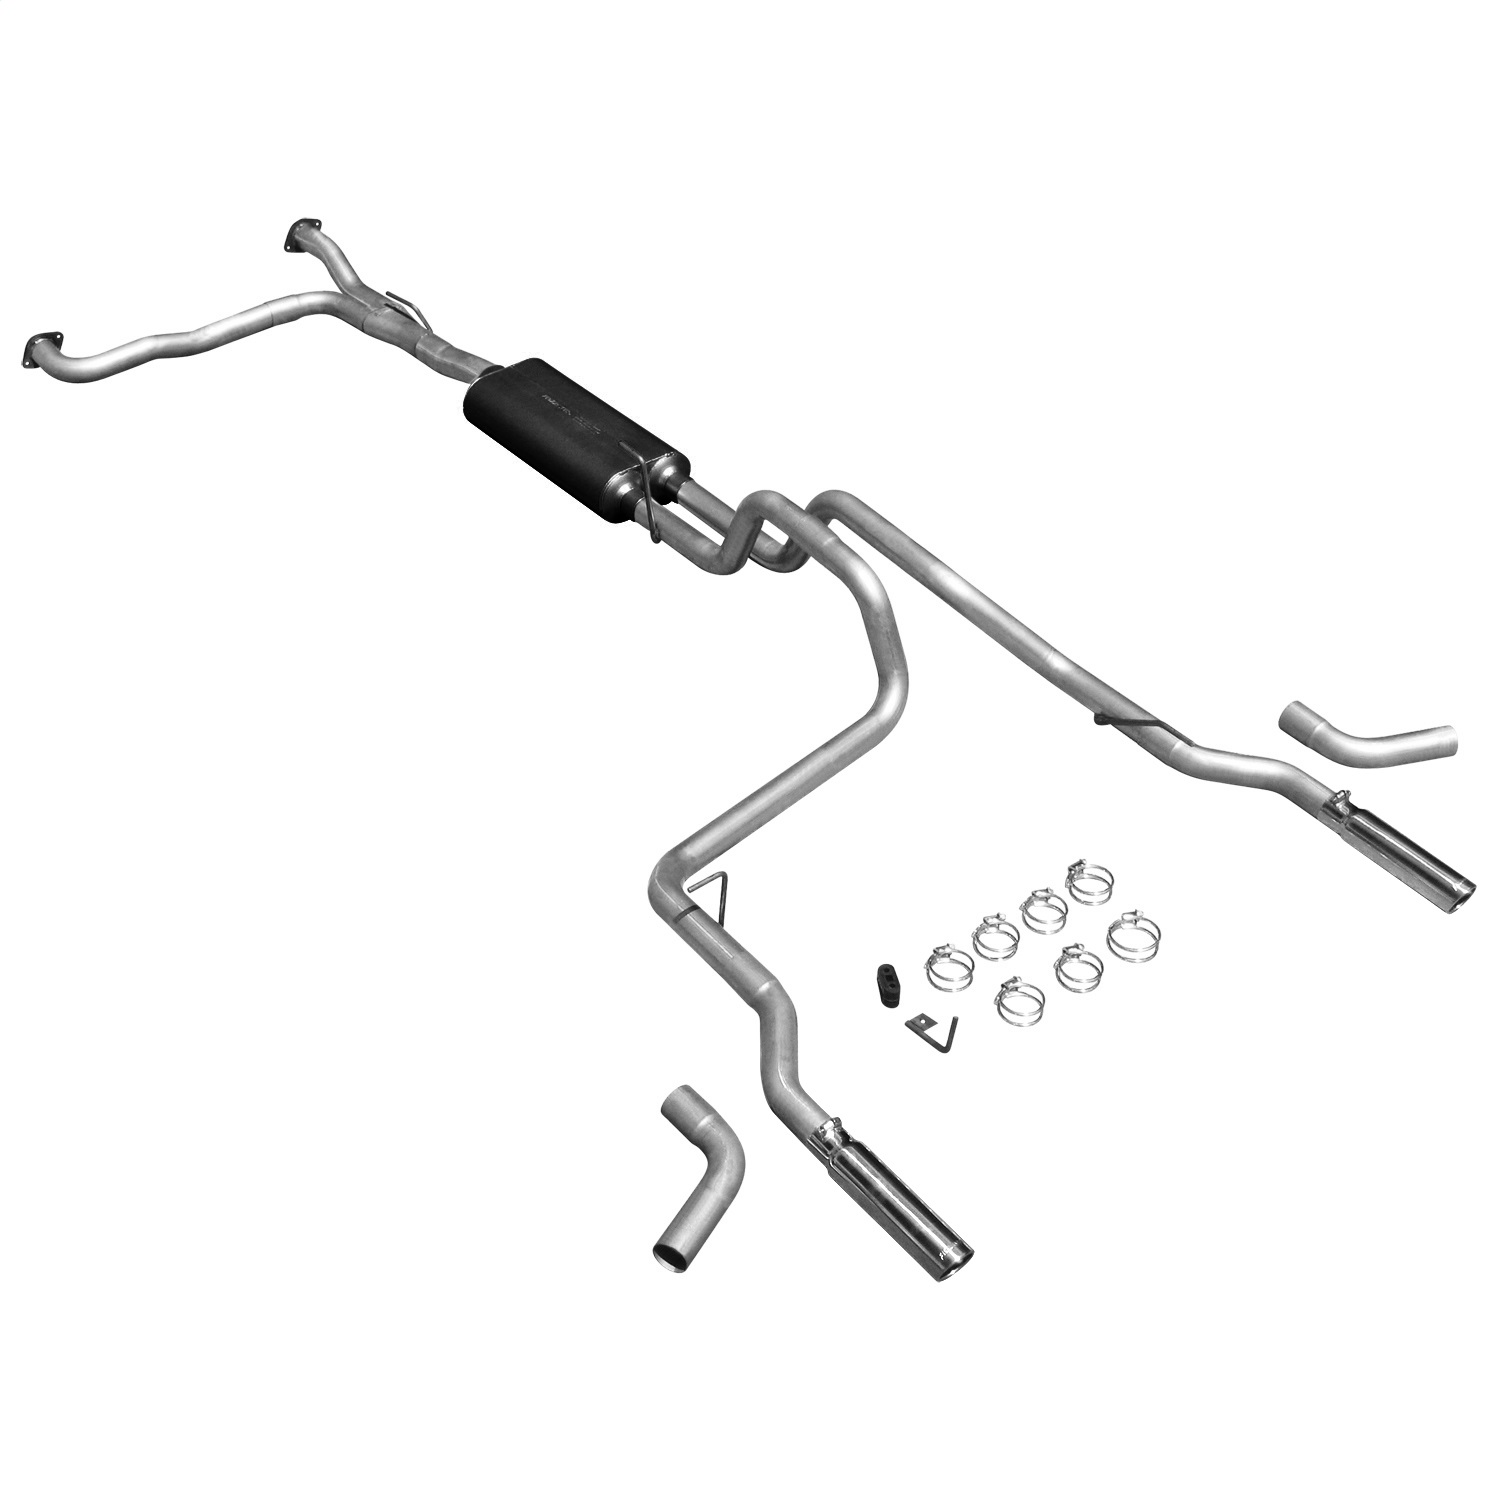 Flowmaster Flowmaster 17406 American Thunder Cat Back Exhaust System Fits 04-08 Titan